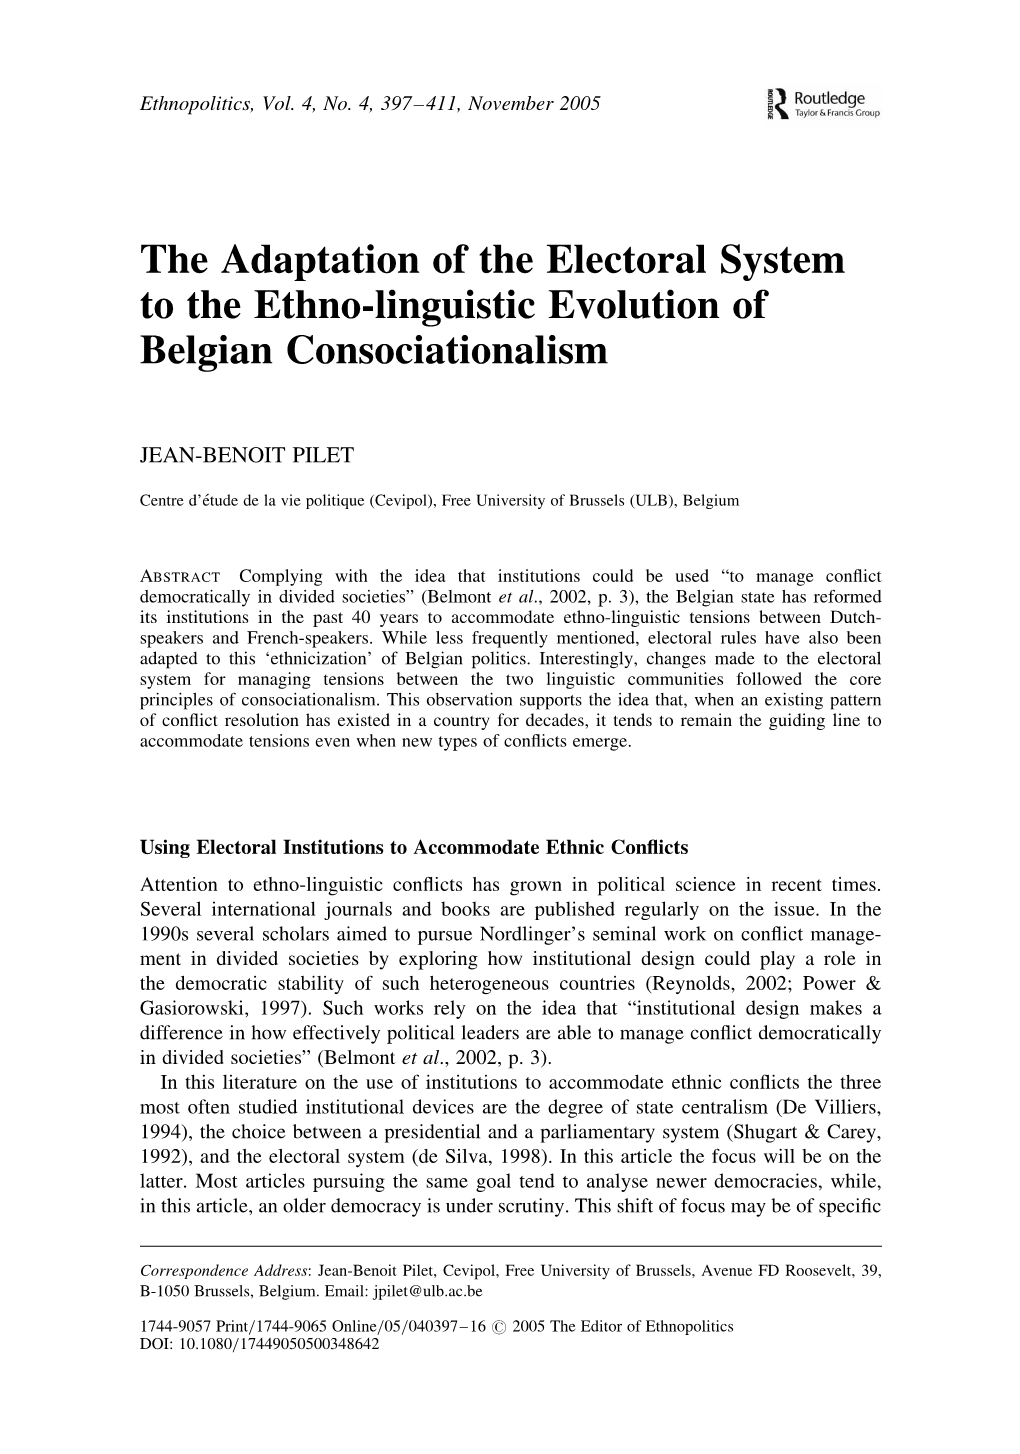 The Adaptation of the Electoral System to the Ethno-Linguistic Evolution of Belgian Consociationalism